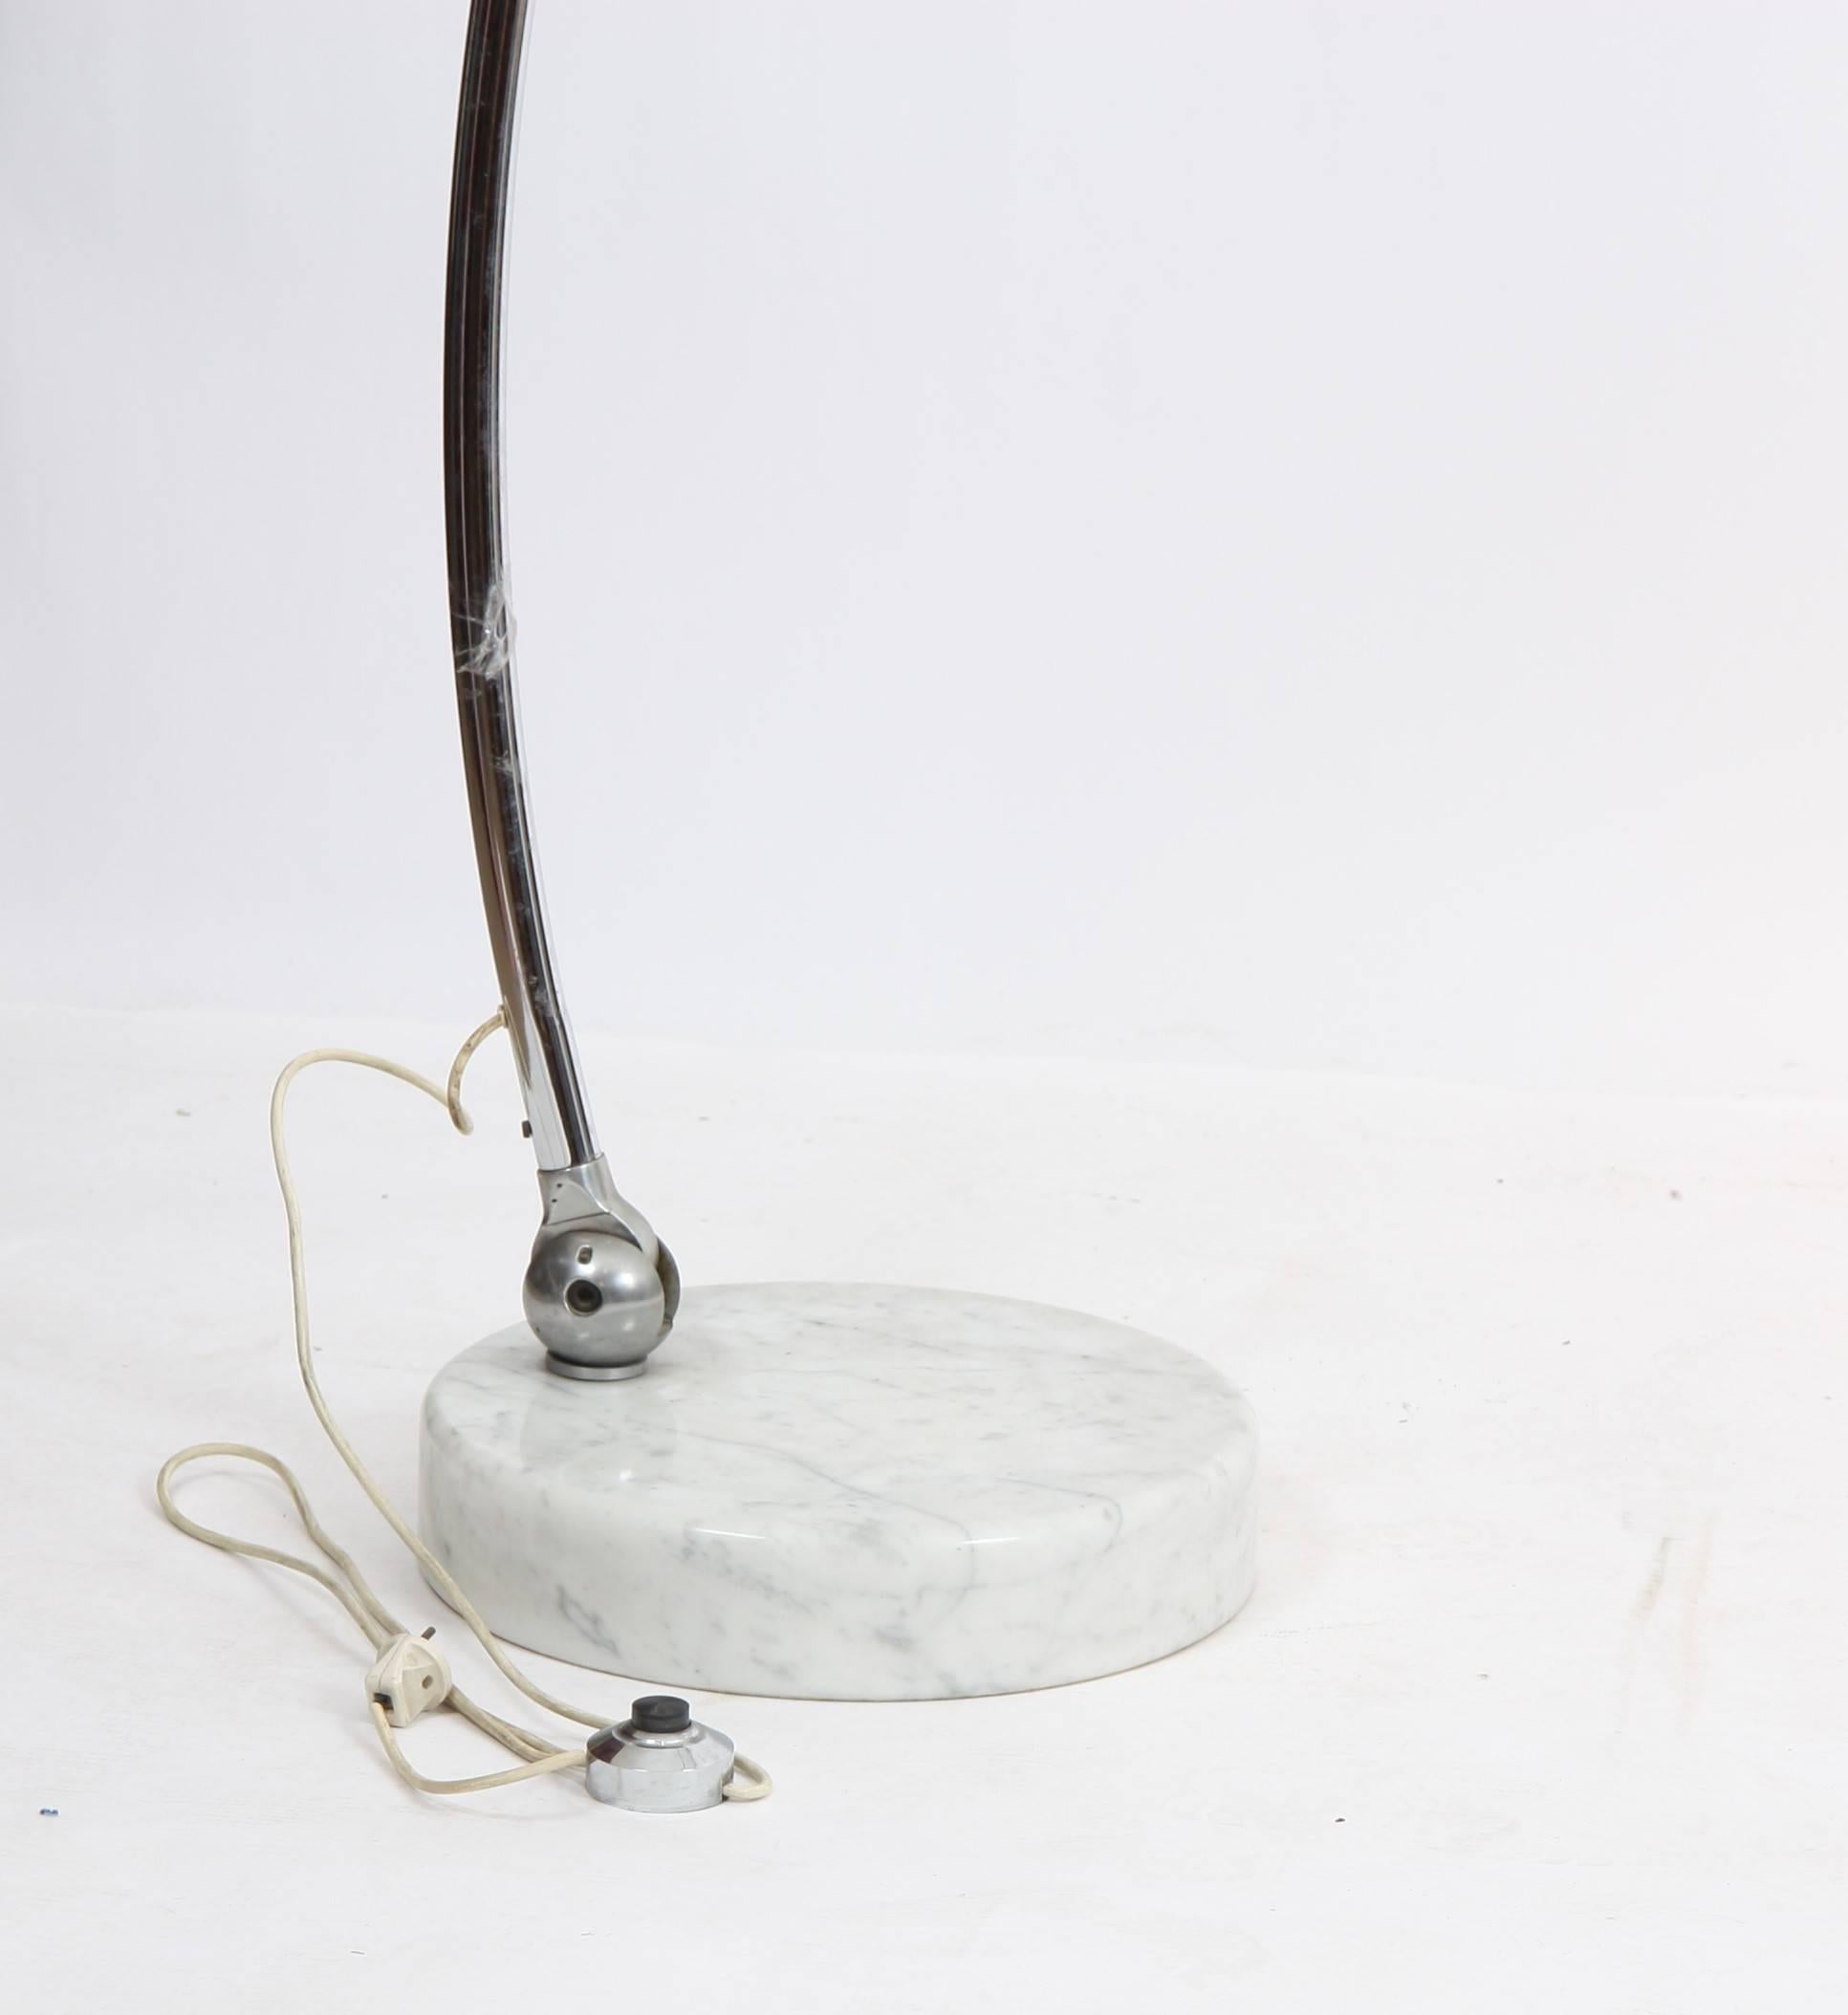 1960s arc floor lamp, composed of a white marble base, an extendable chrome-plated metal shaft and a beige molded plastic shade.
Good overall and working condition.